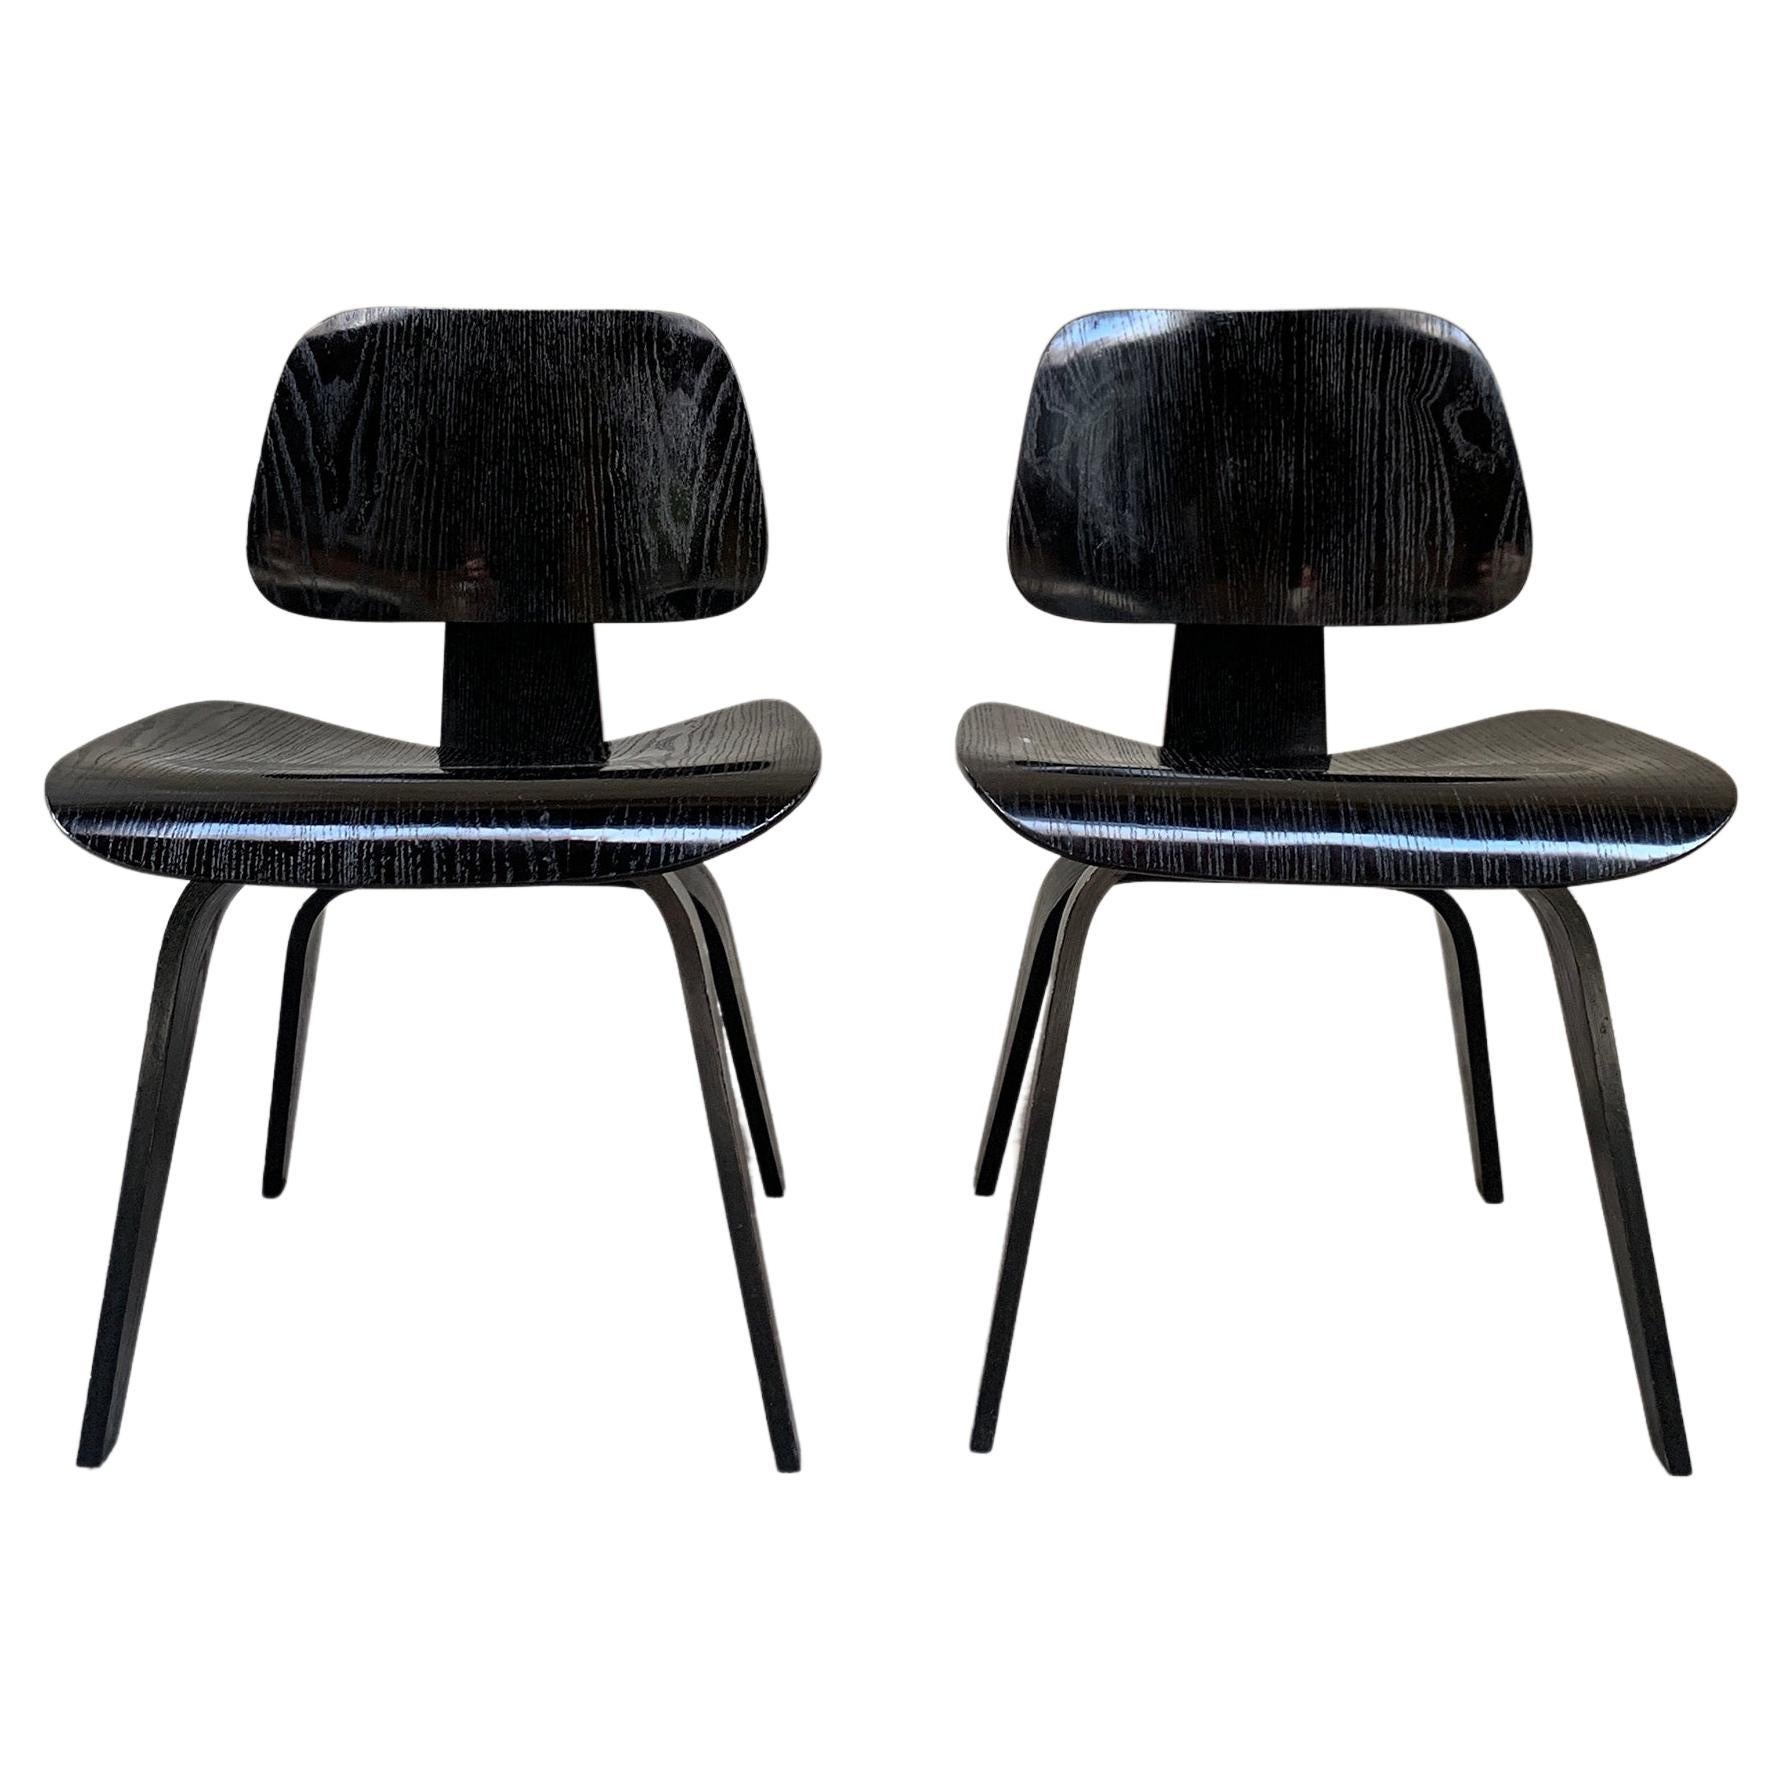 Pair early DCW Dining Chair in black by Charles & Ray Eames, Herman Miller 1950s